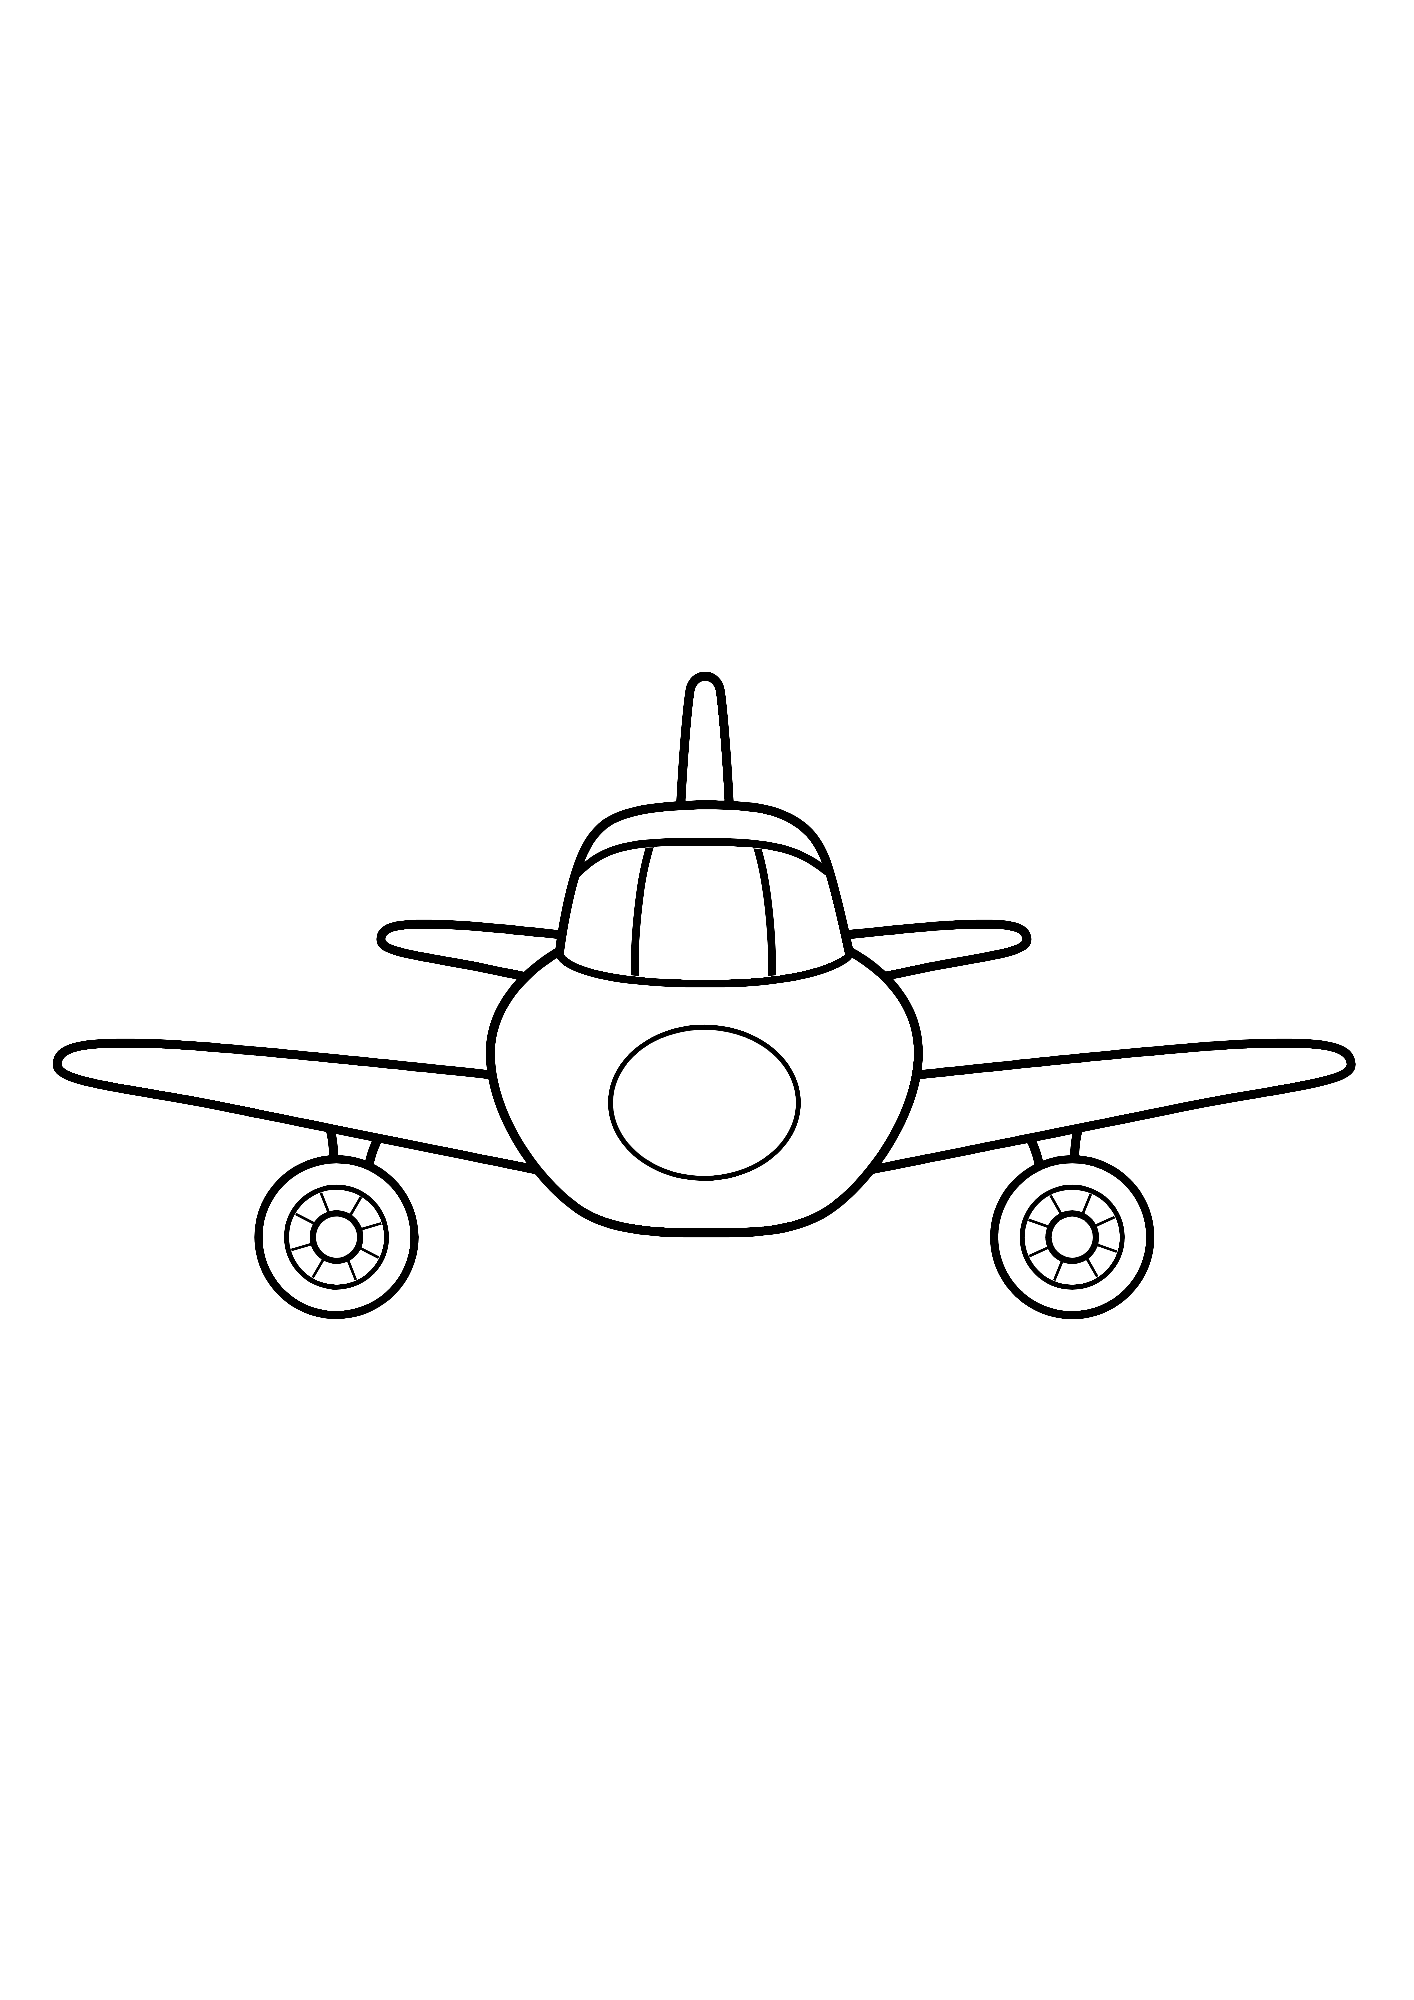 Airplane Painting Coloring Pages